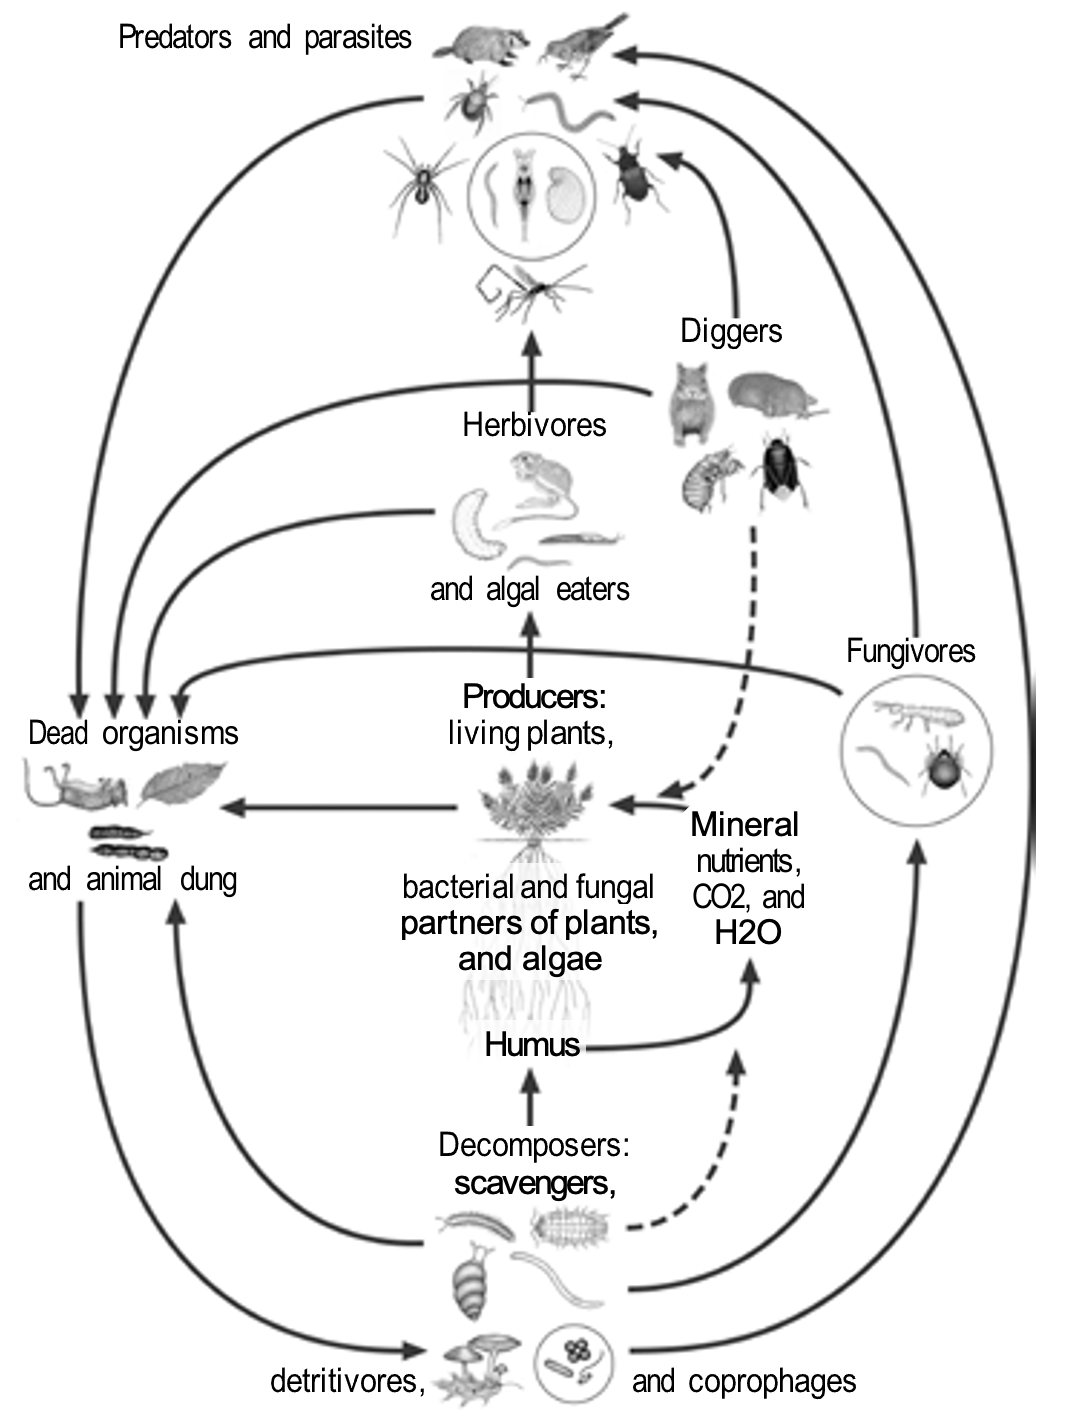 Soil life food web with arrows pointing to different organisms